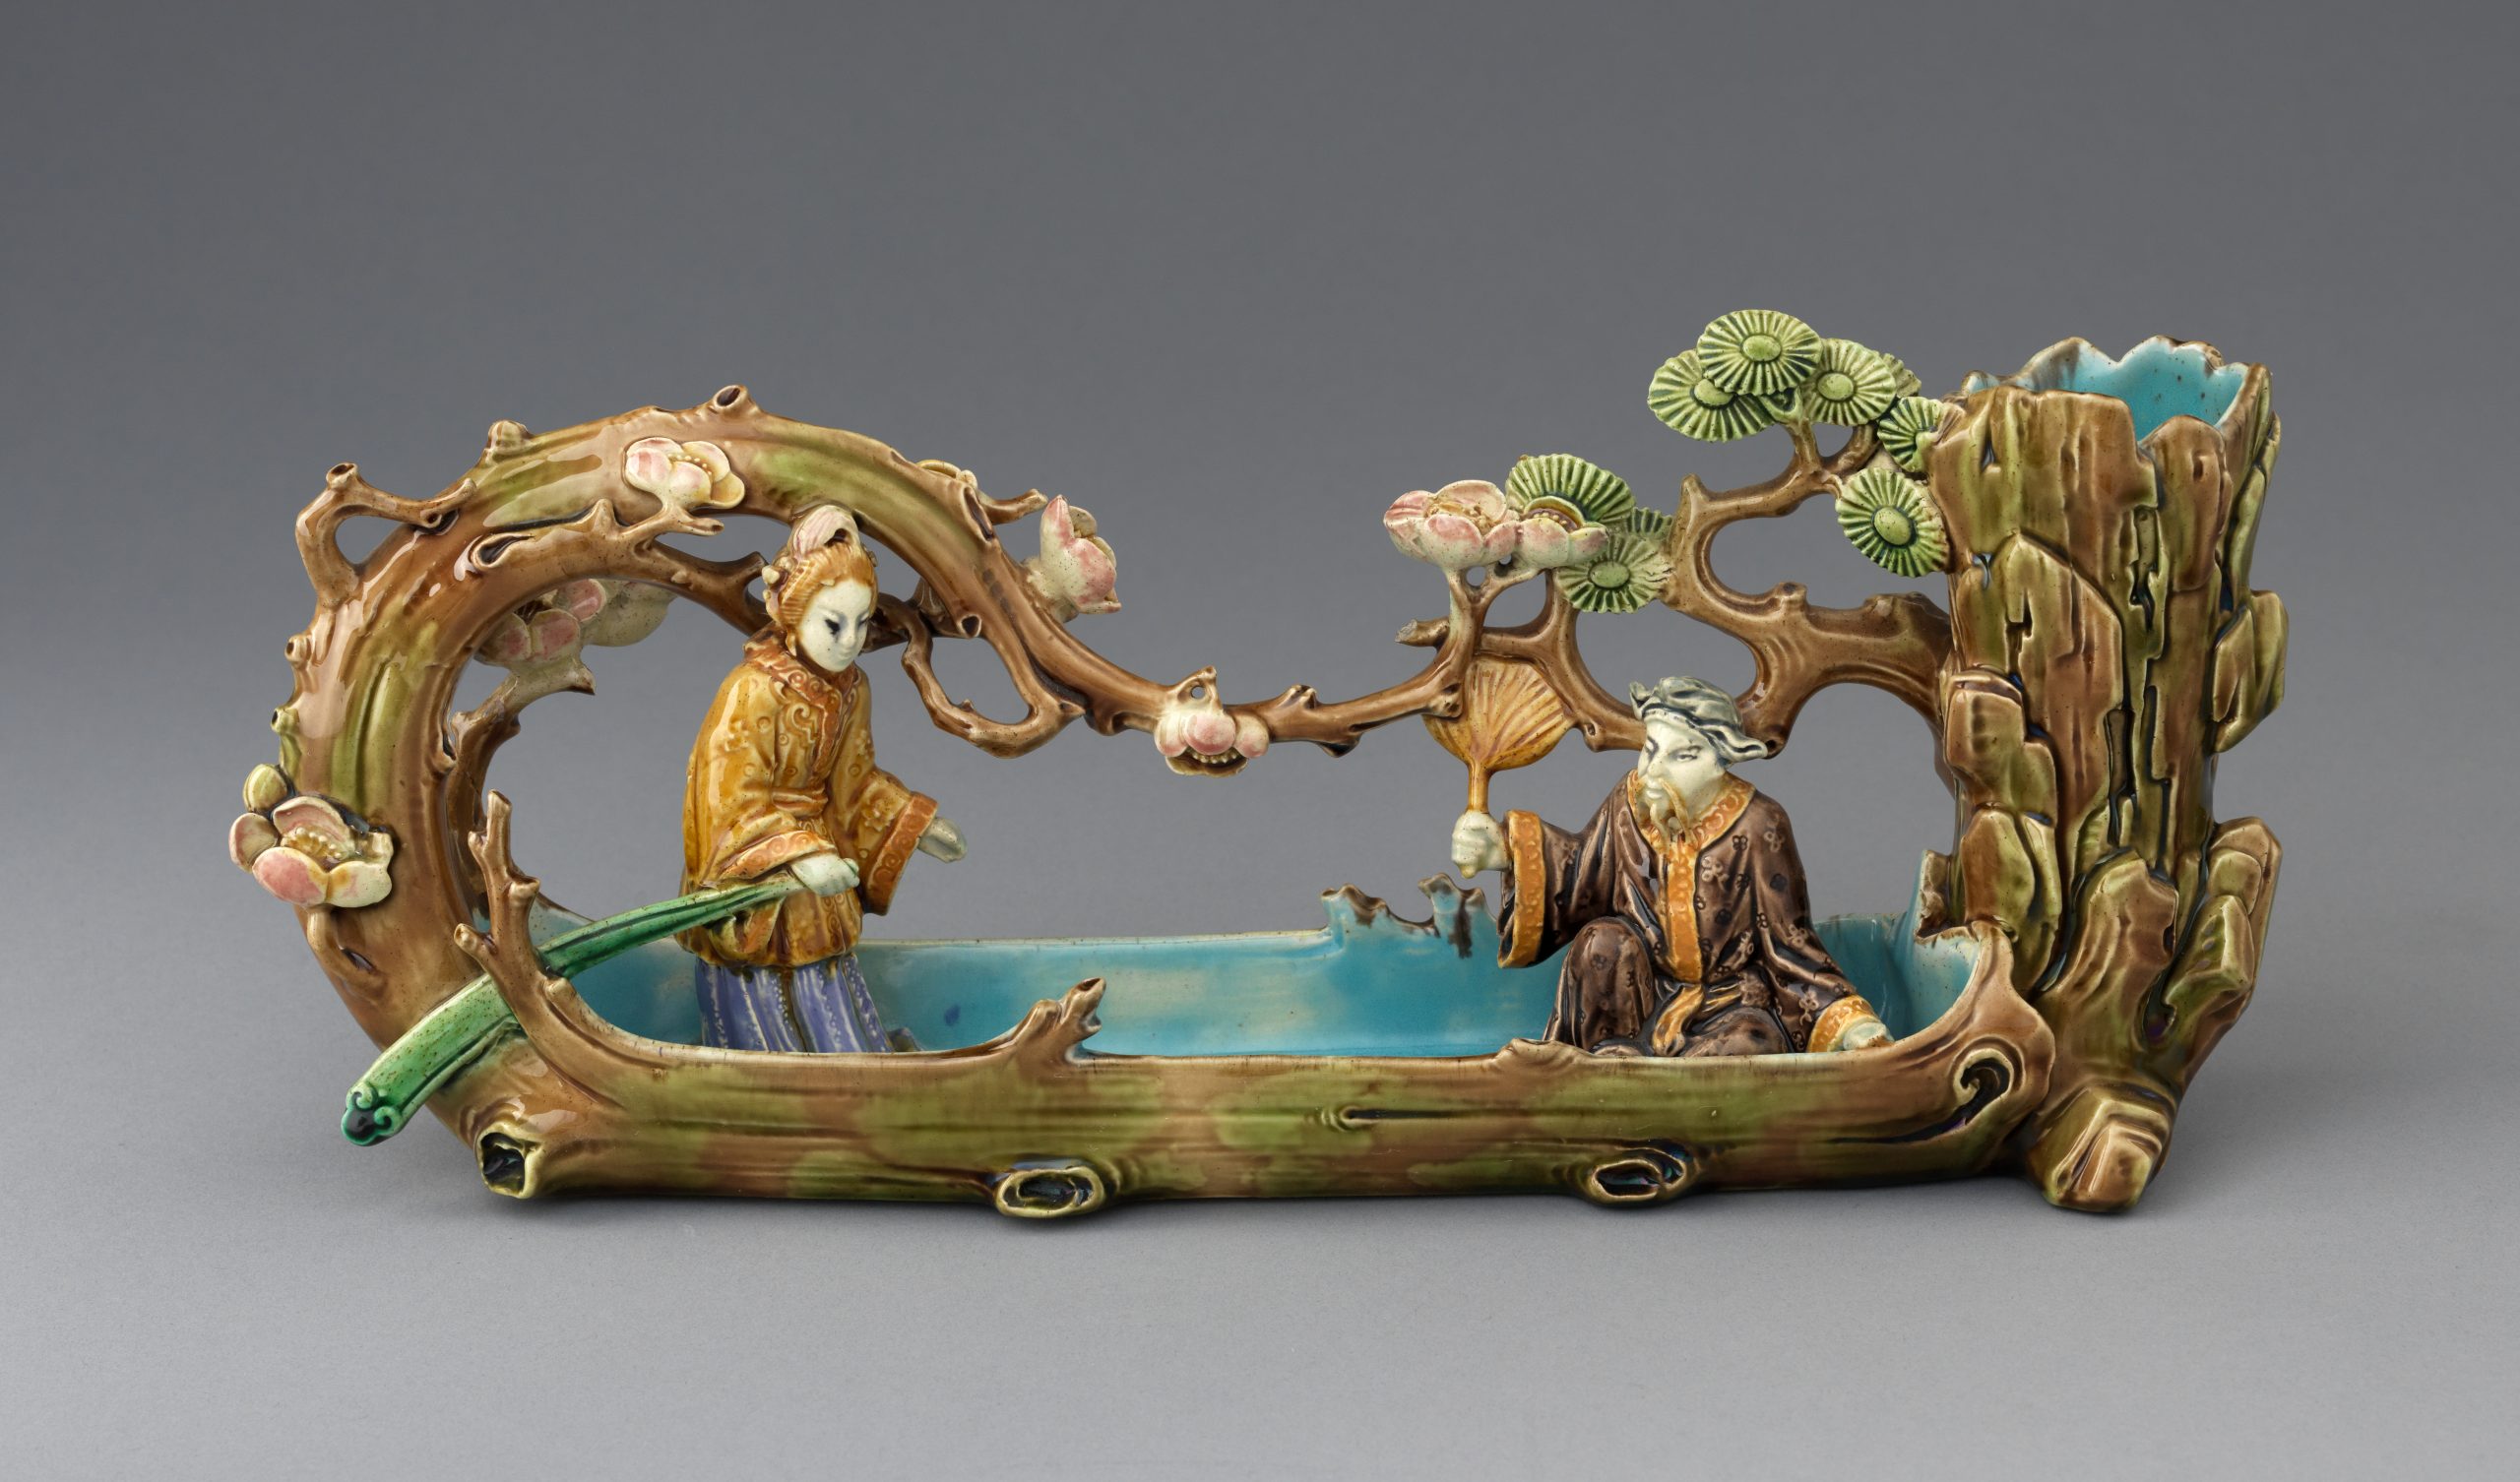 Small majolica sculpture of "Japanese" boatmen in long boat made to look like a carved out tree trunk with pink flowering branches curving up and over each side.